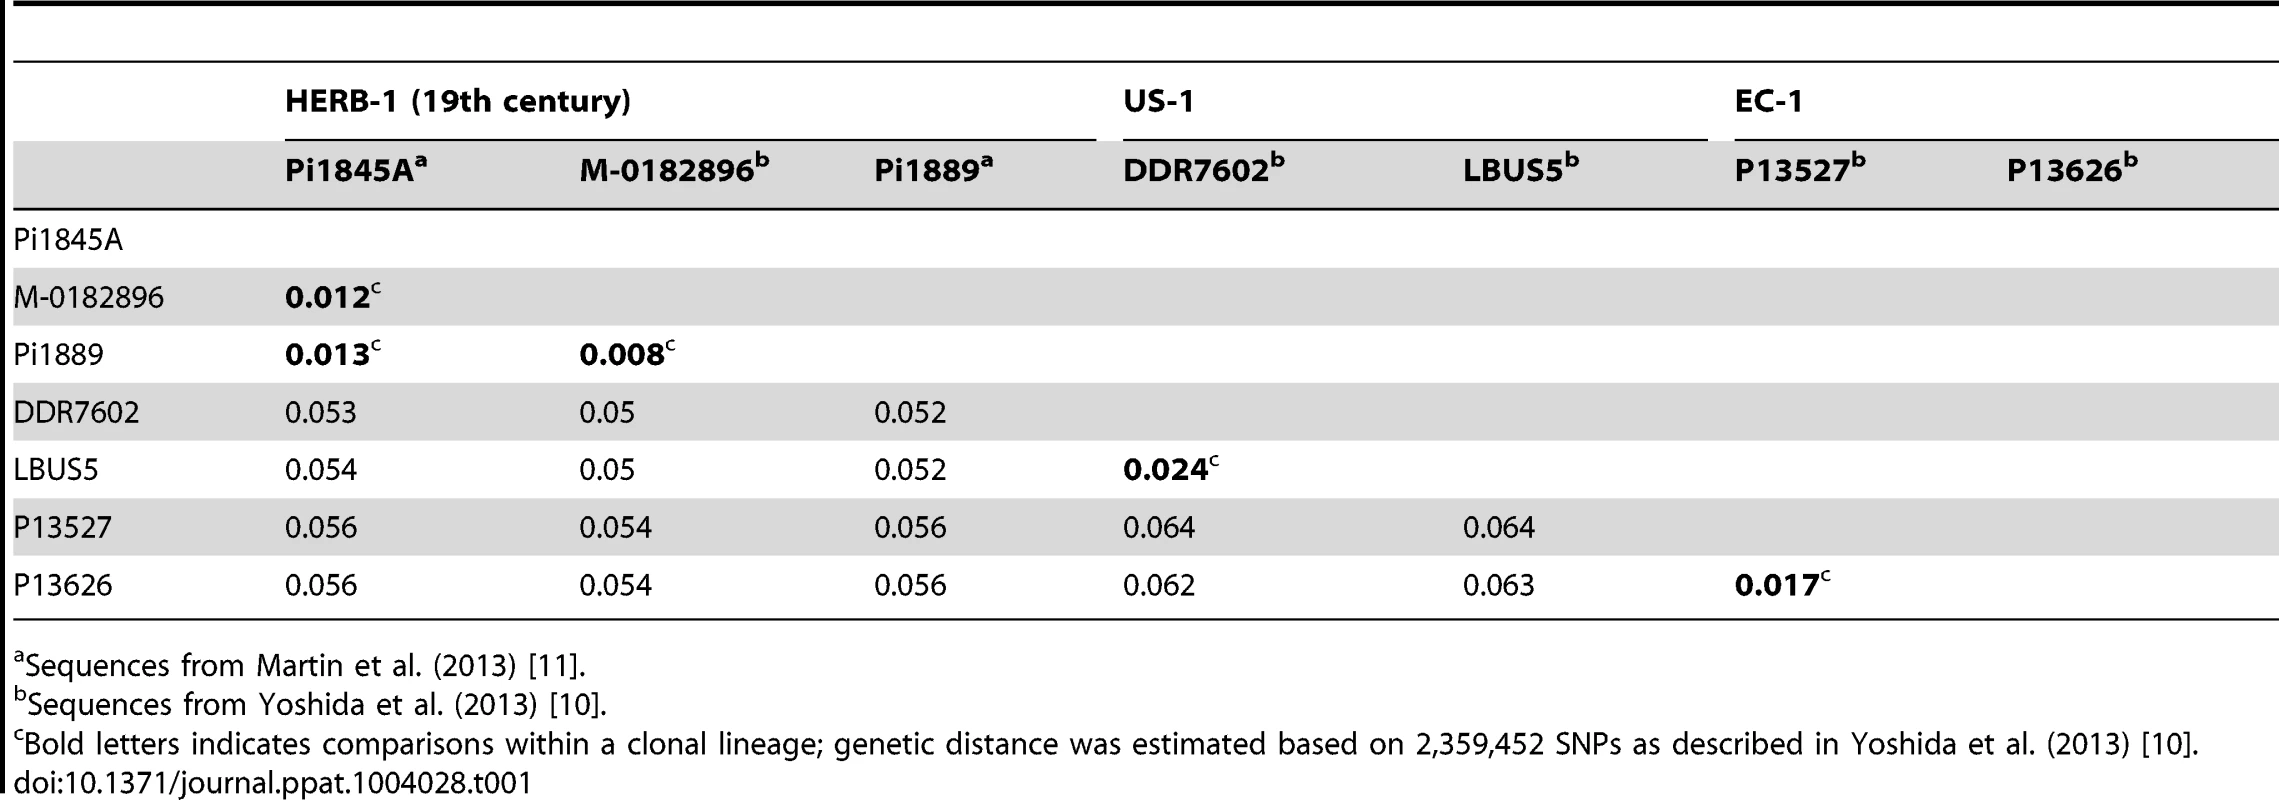 Genetic distance between individual isolates of clonal lineages HERB-1, US-1, and EC-1 of <i>P. infestans</i>.